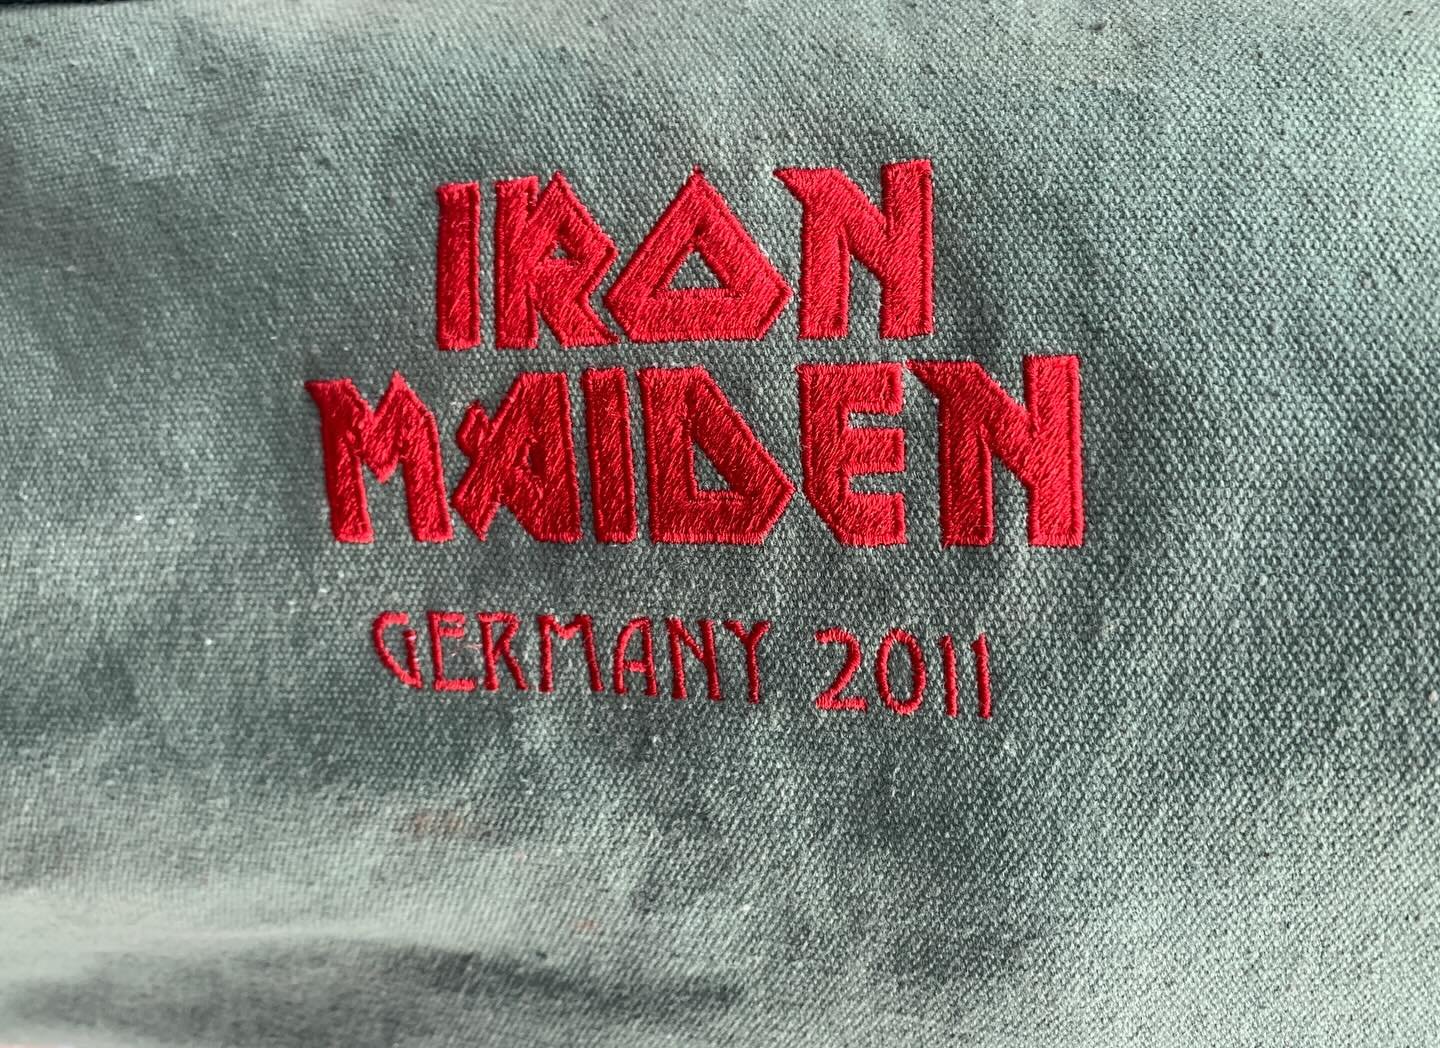 2011 Iron Maiden German Tour bag, not a piece of merch, but actually made for the band and crew. 100% authentic, super rare bit of memorabilia.
#ironmaiden 
#brucedickinson 
#rock
#heavymetal
#classicrock
#metal
#thrash
#musicmemorabilia 
#englishroc